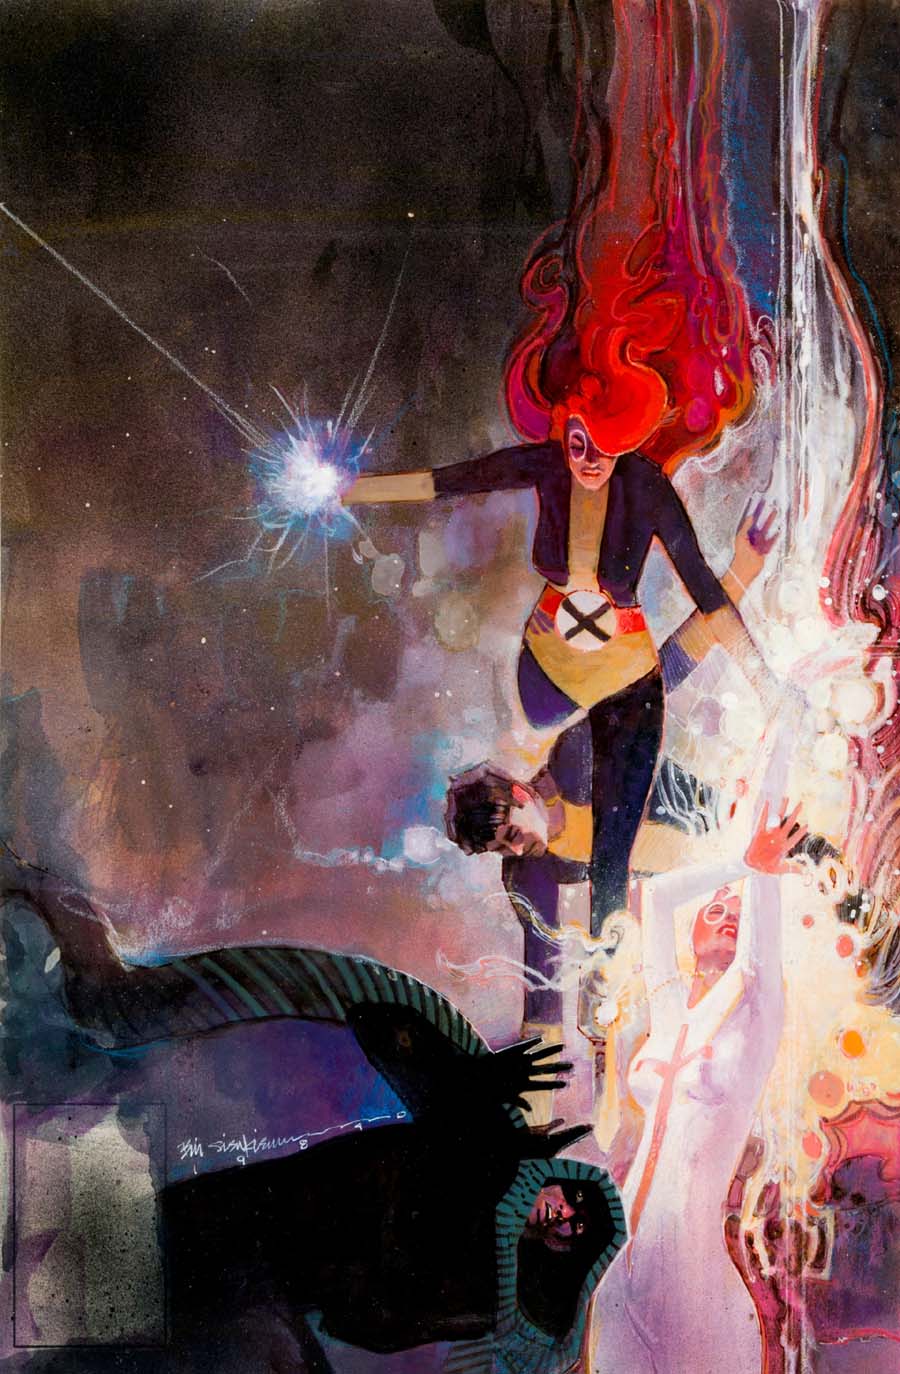 Cover art for “The New Mutants” #25, March 1985